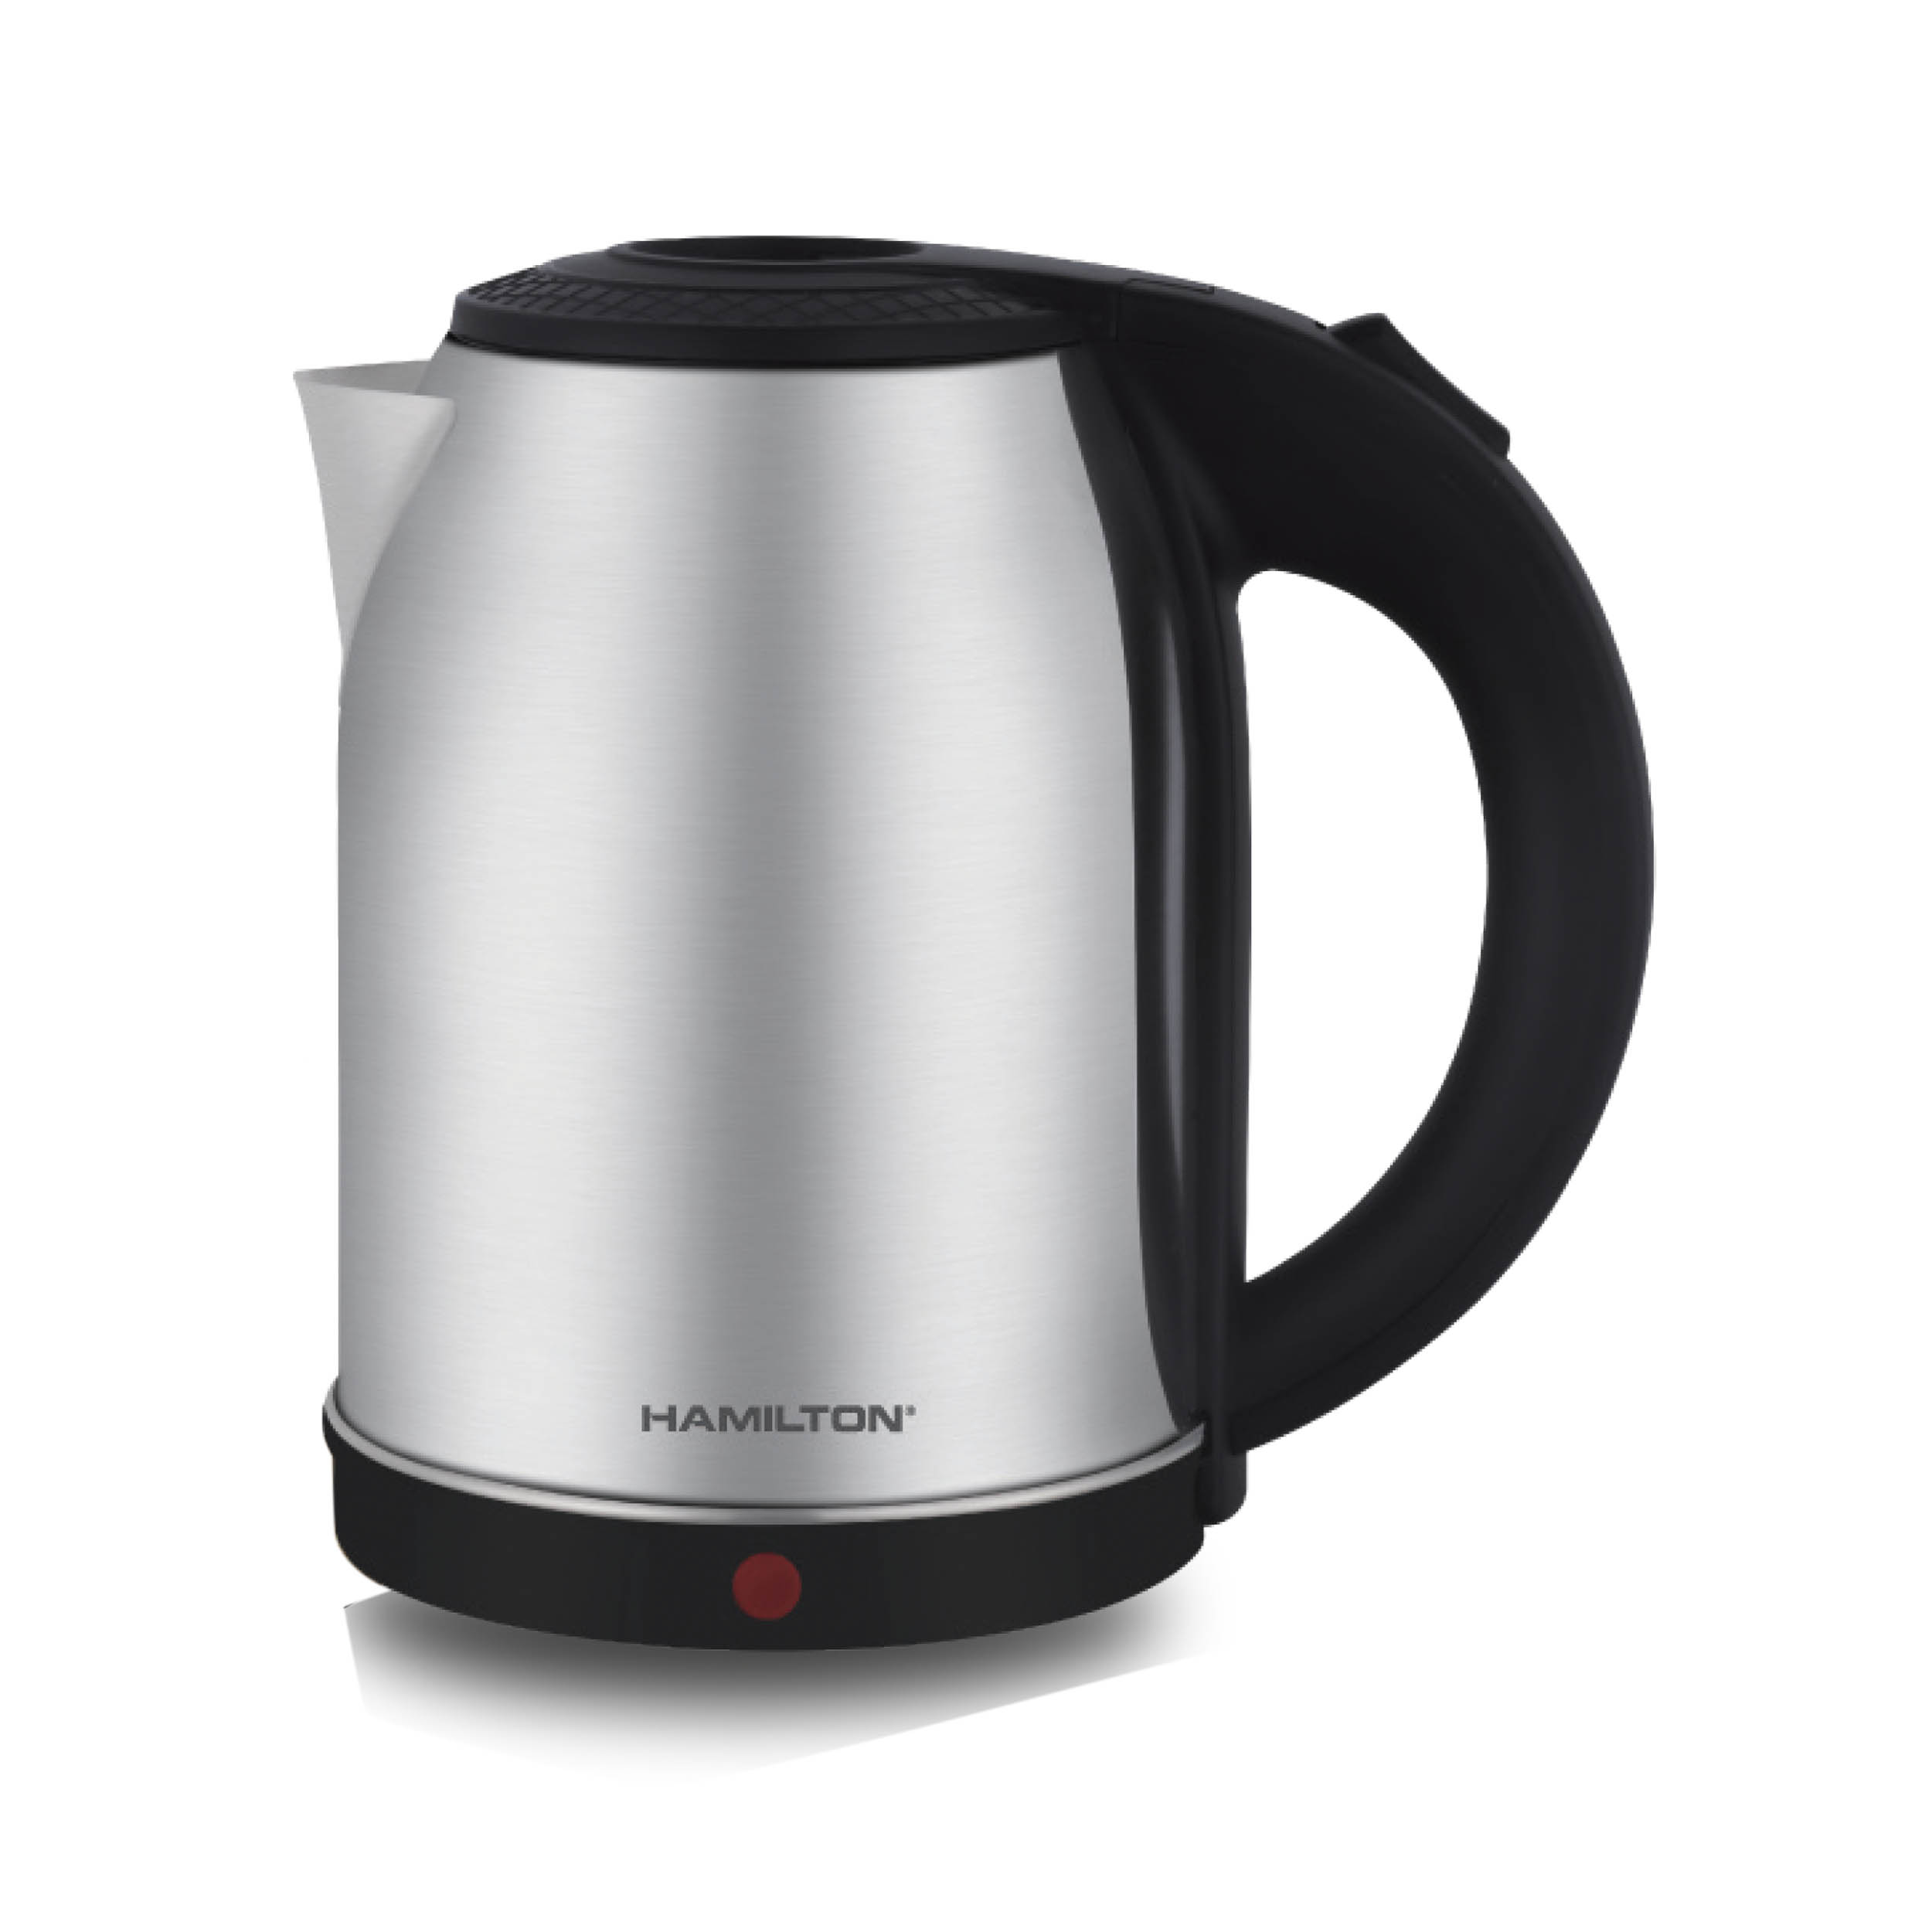 HAMILTON Stainless Steel Electrical Kettle HT5804